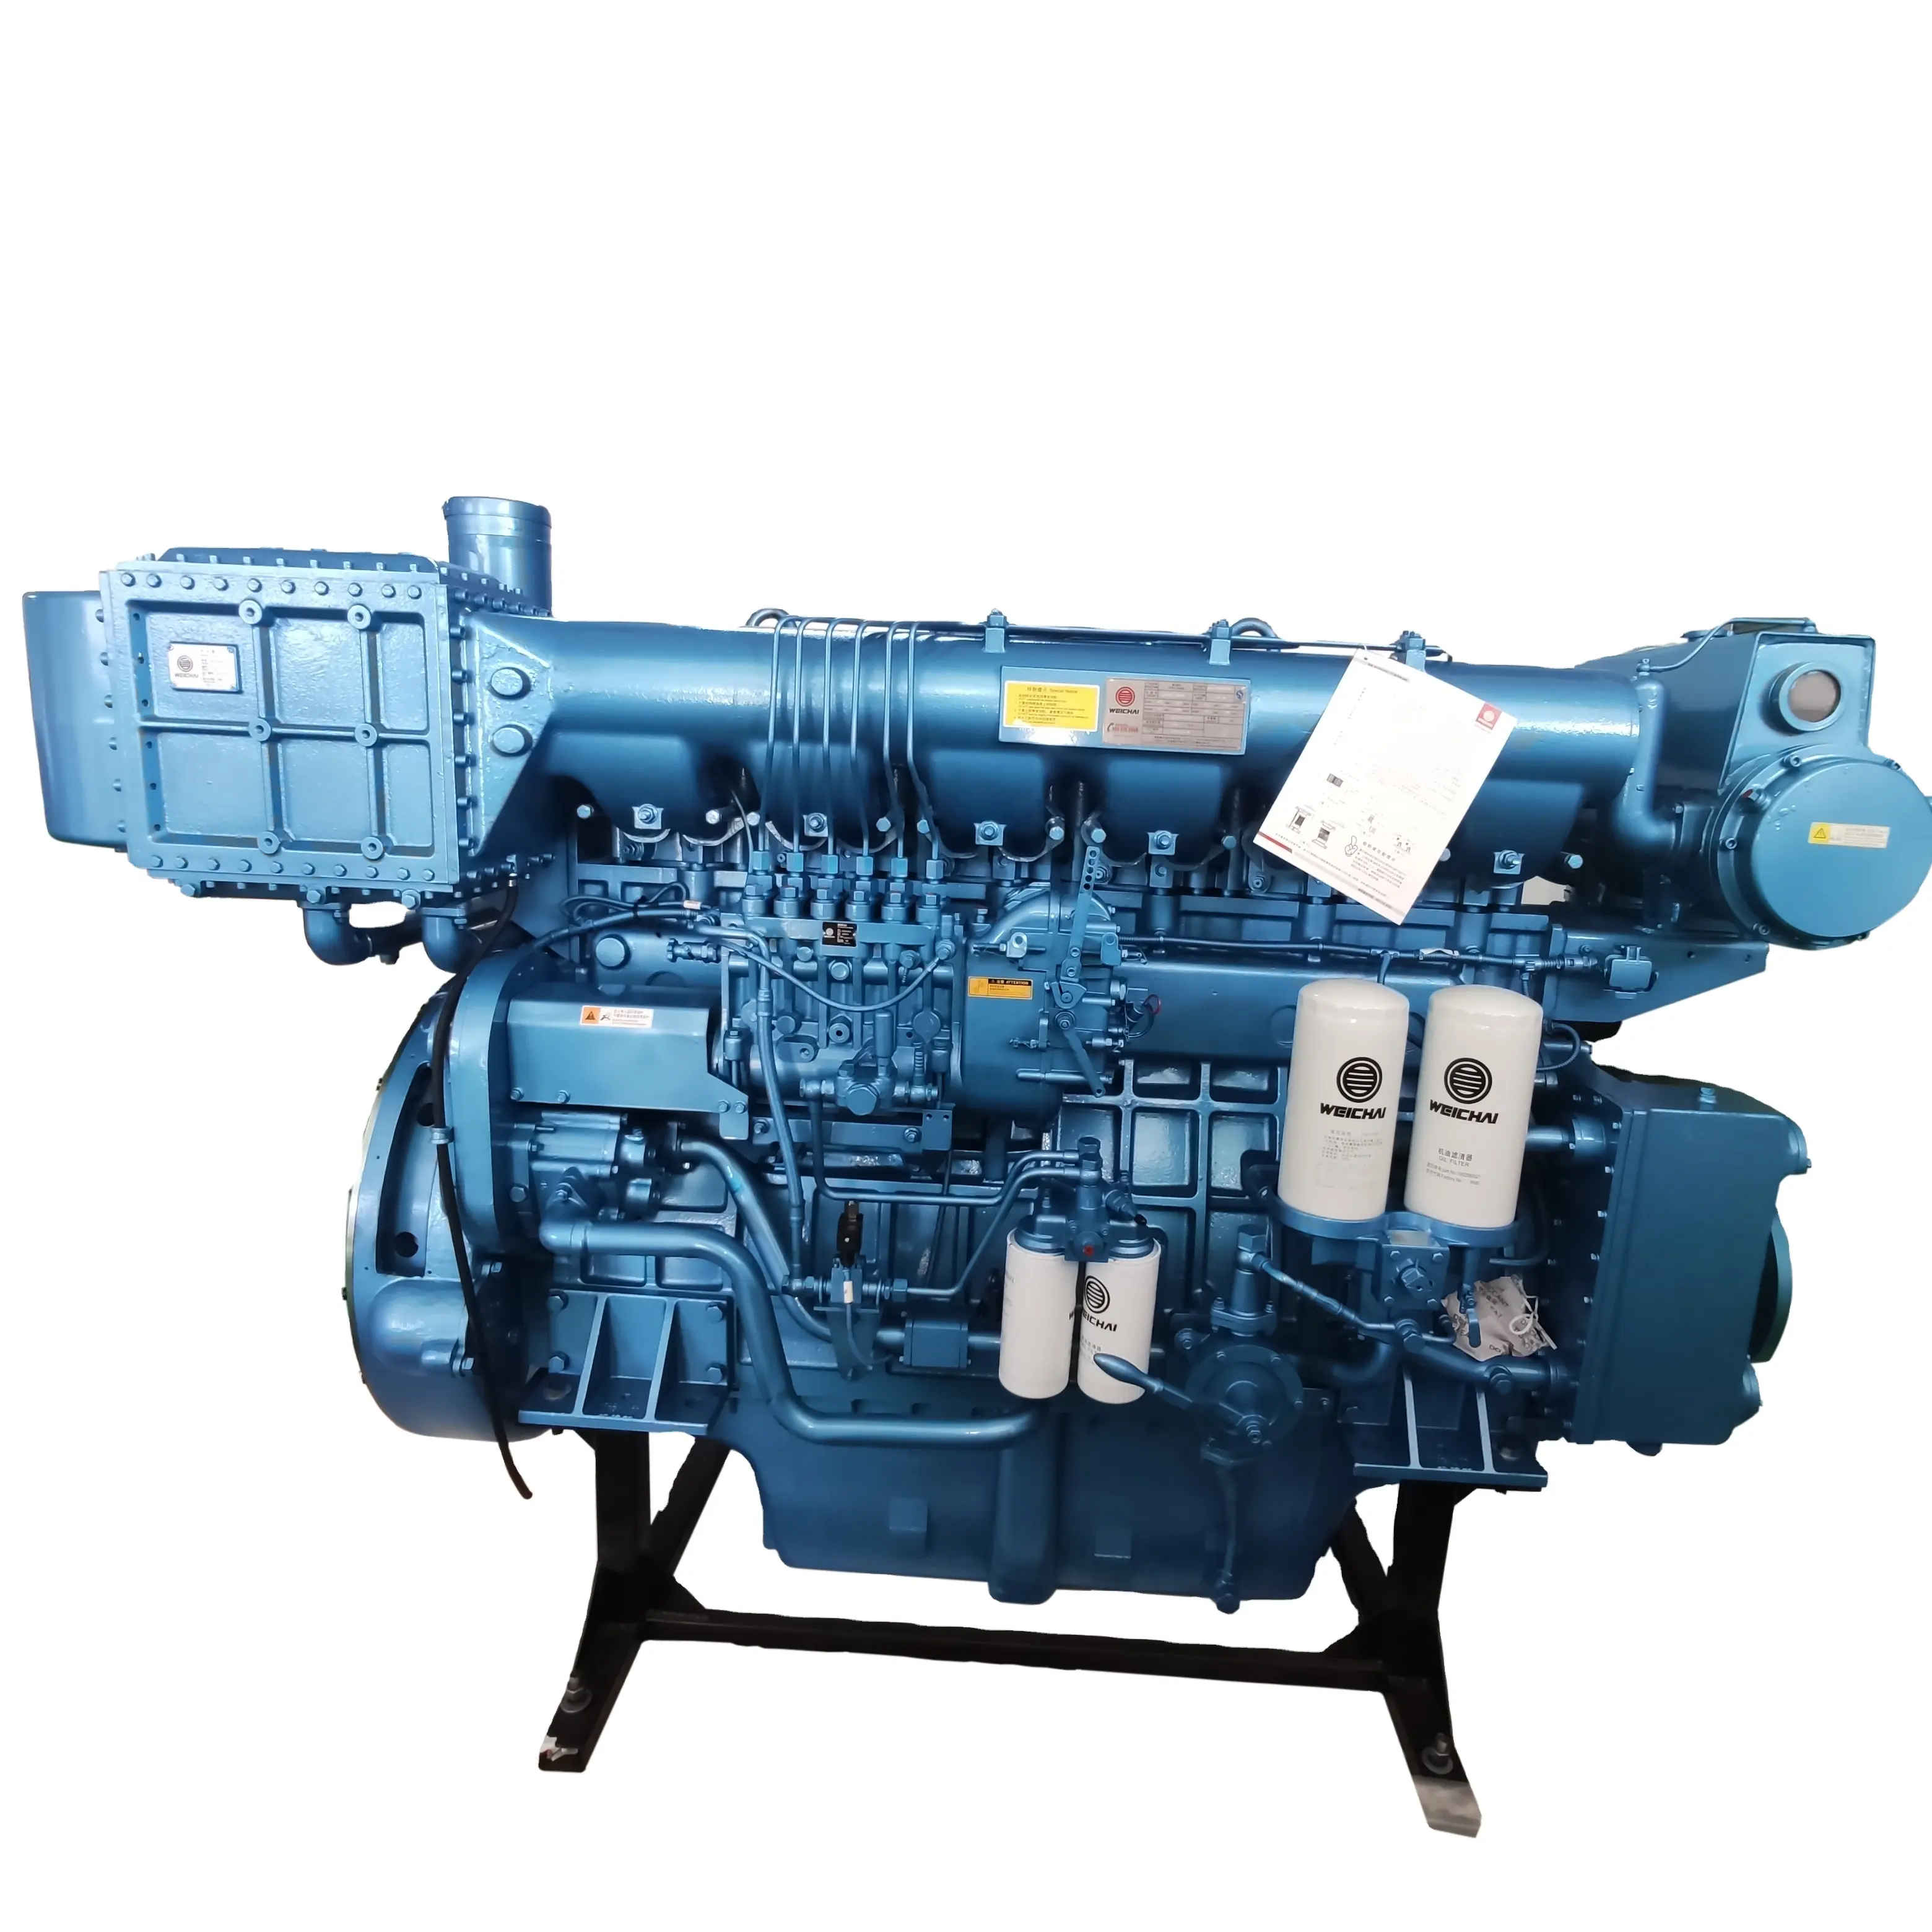 4 strokes 6 cylinders boat motor engine for fishing ship water cooled weichai marine diesel engine X6170ZC650-2 for marine